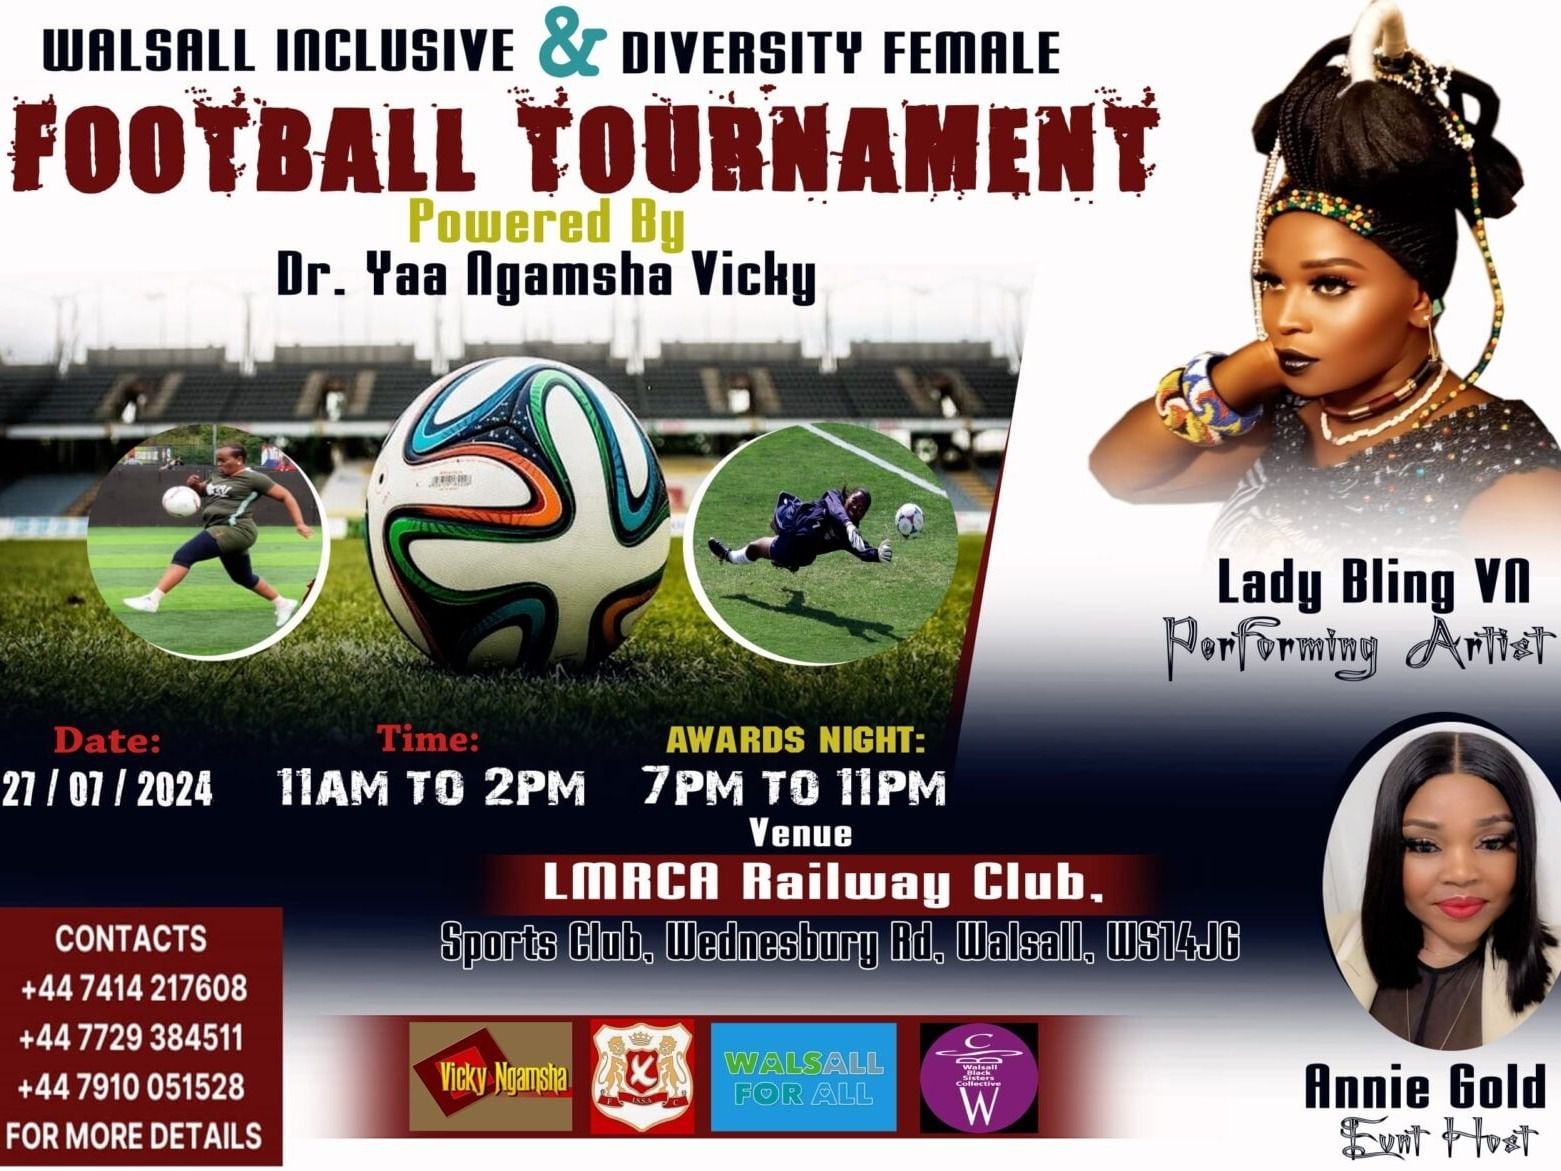 Walsall will host women's football tournament to promote diversity and inclusion